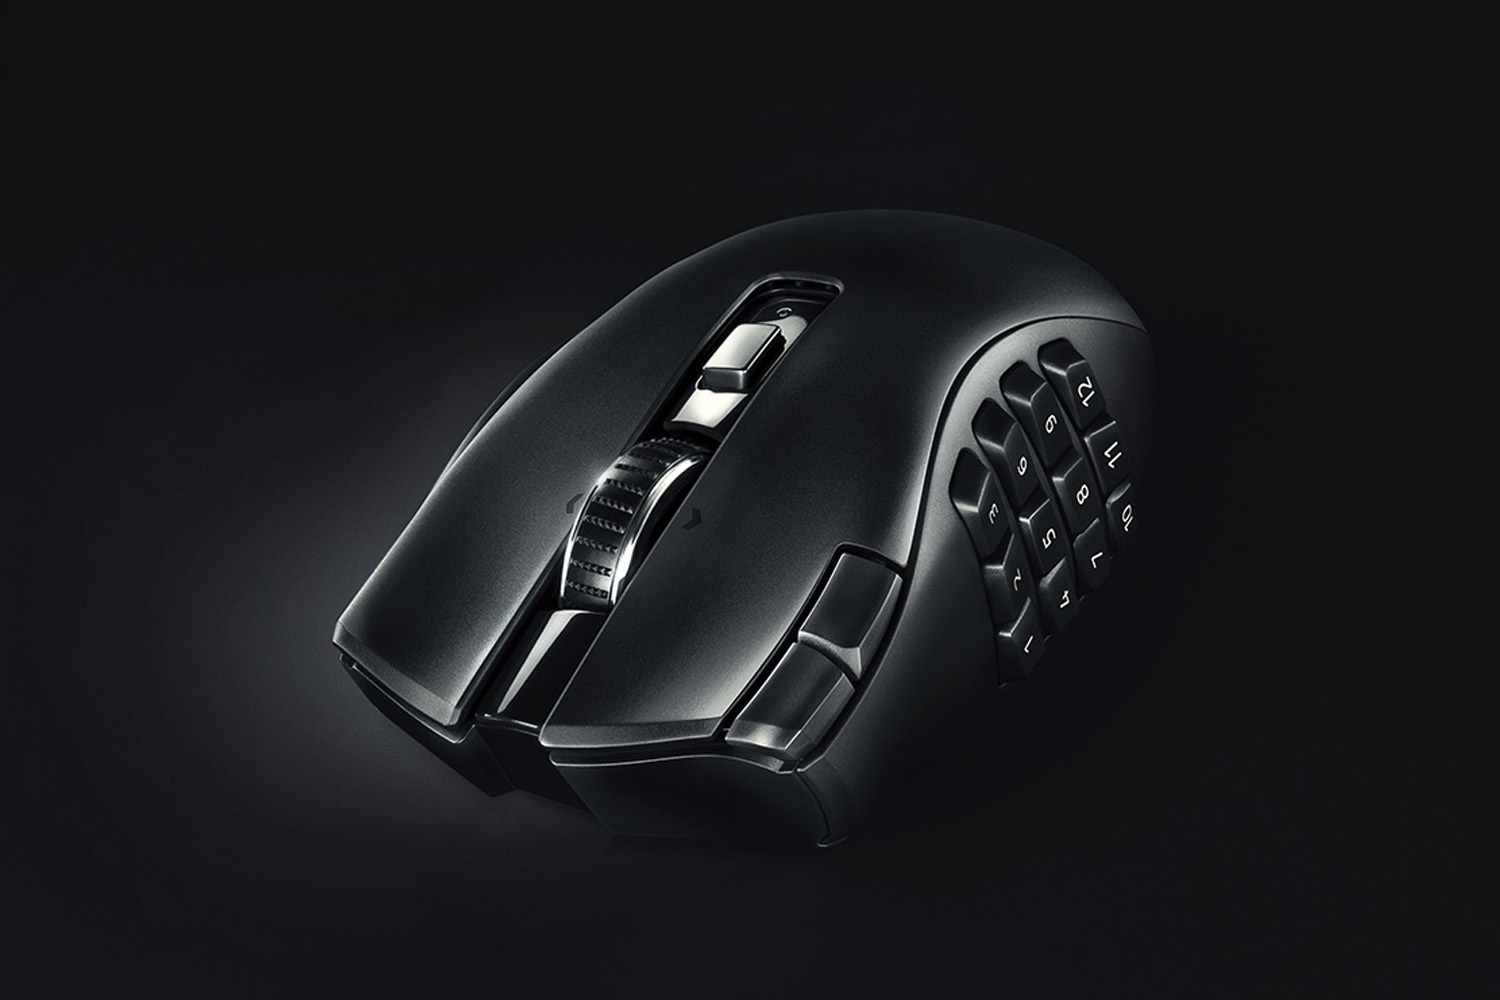 Razer Naga V2 Hyperspeed mouse from the front view of the render